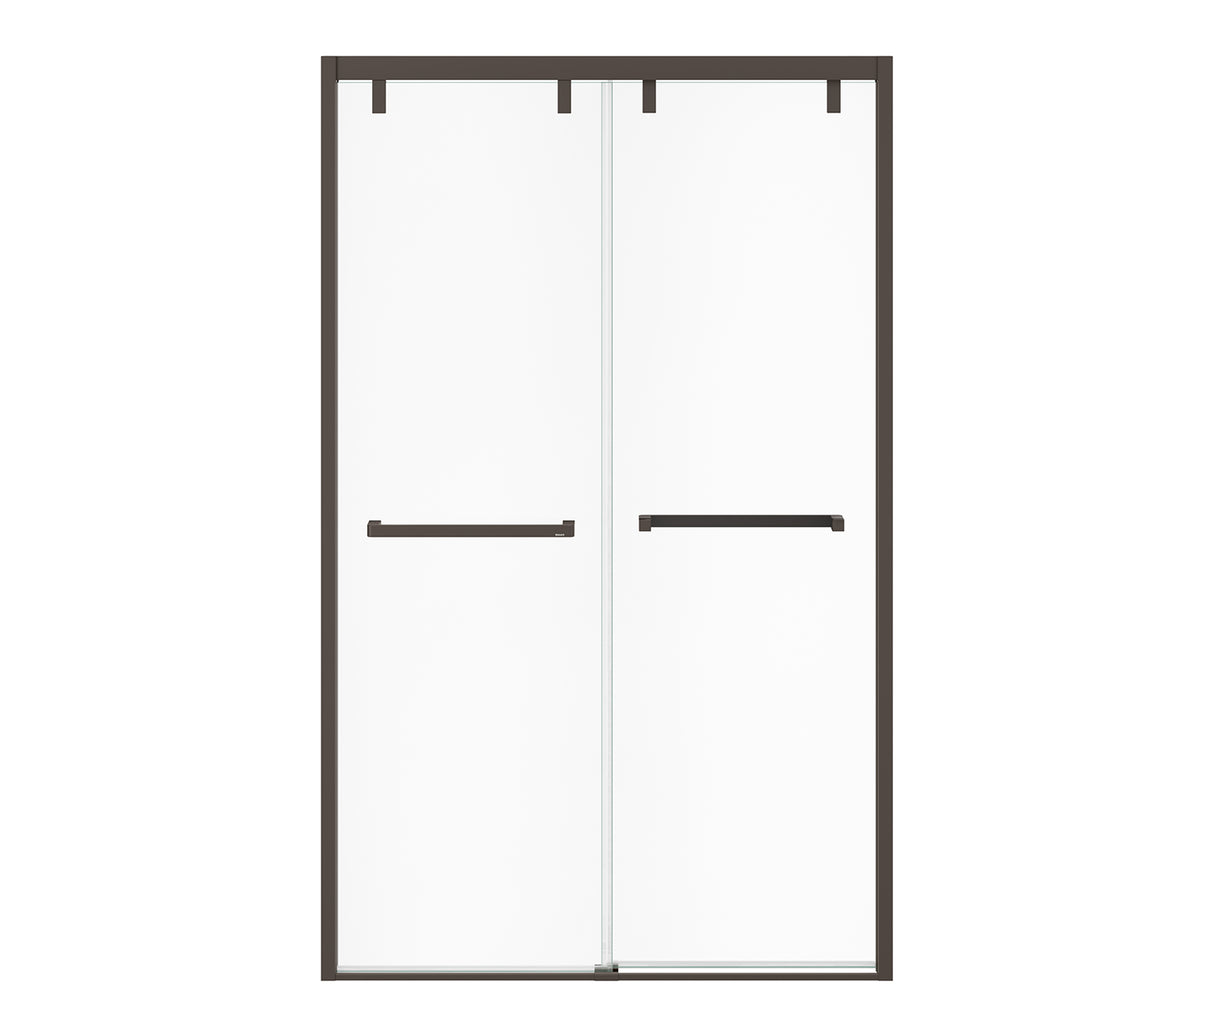 MAAX 135321-900-173-000 Uptown 44-47 x 76 in. 8 mm Bypass Shower Door for Alcove Installation with Clear glass in Dark Bronze